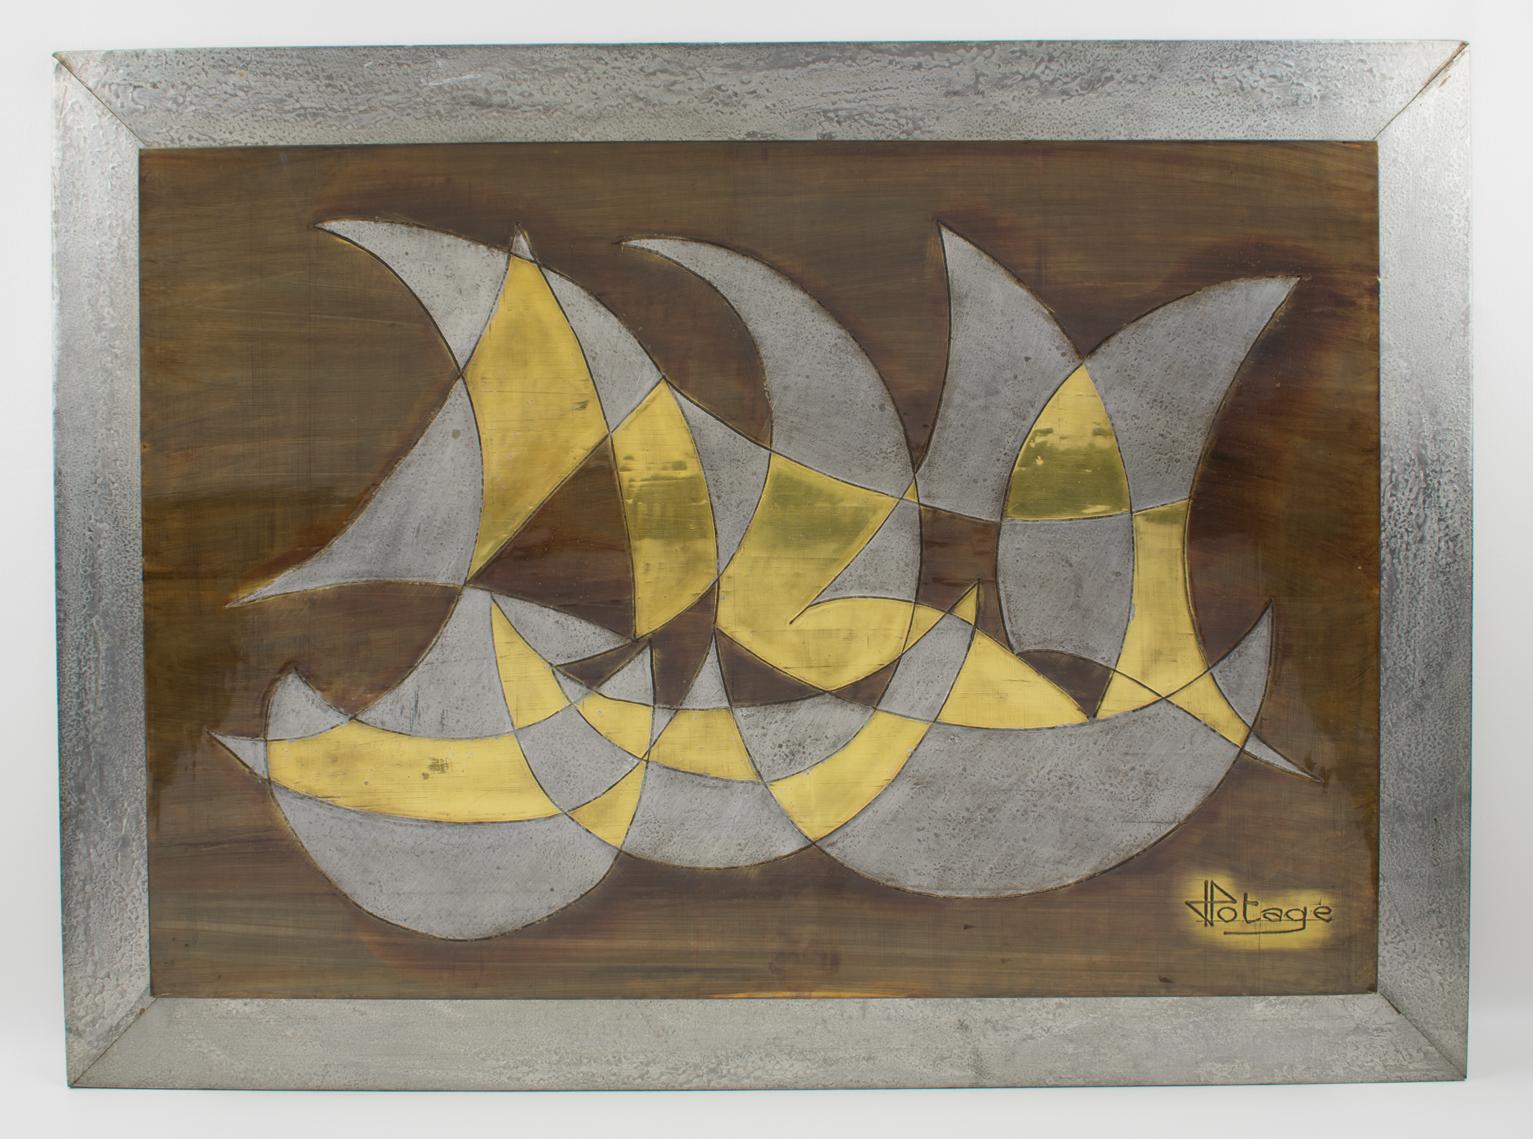 French artist Jacques Potage (1931 -) handcrafted this striking brutalist wall art sculpture. Mounted on a wood plank covered with textured pewter, the metal panel features a stylized set of sailboats in abstract mixed metal modernist-inspired